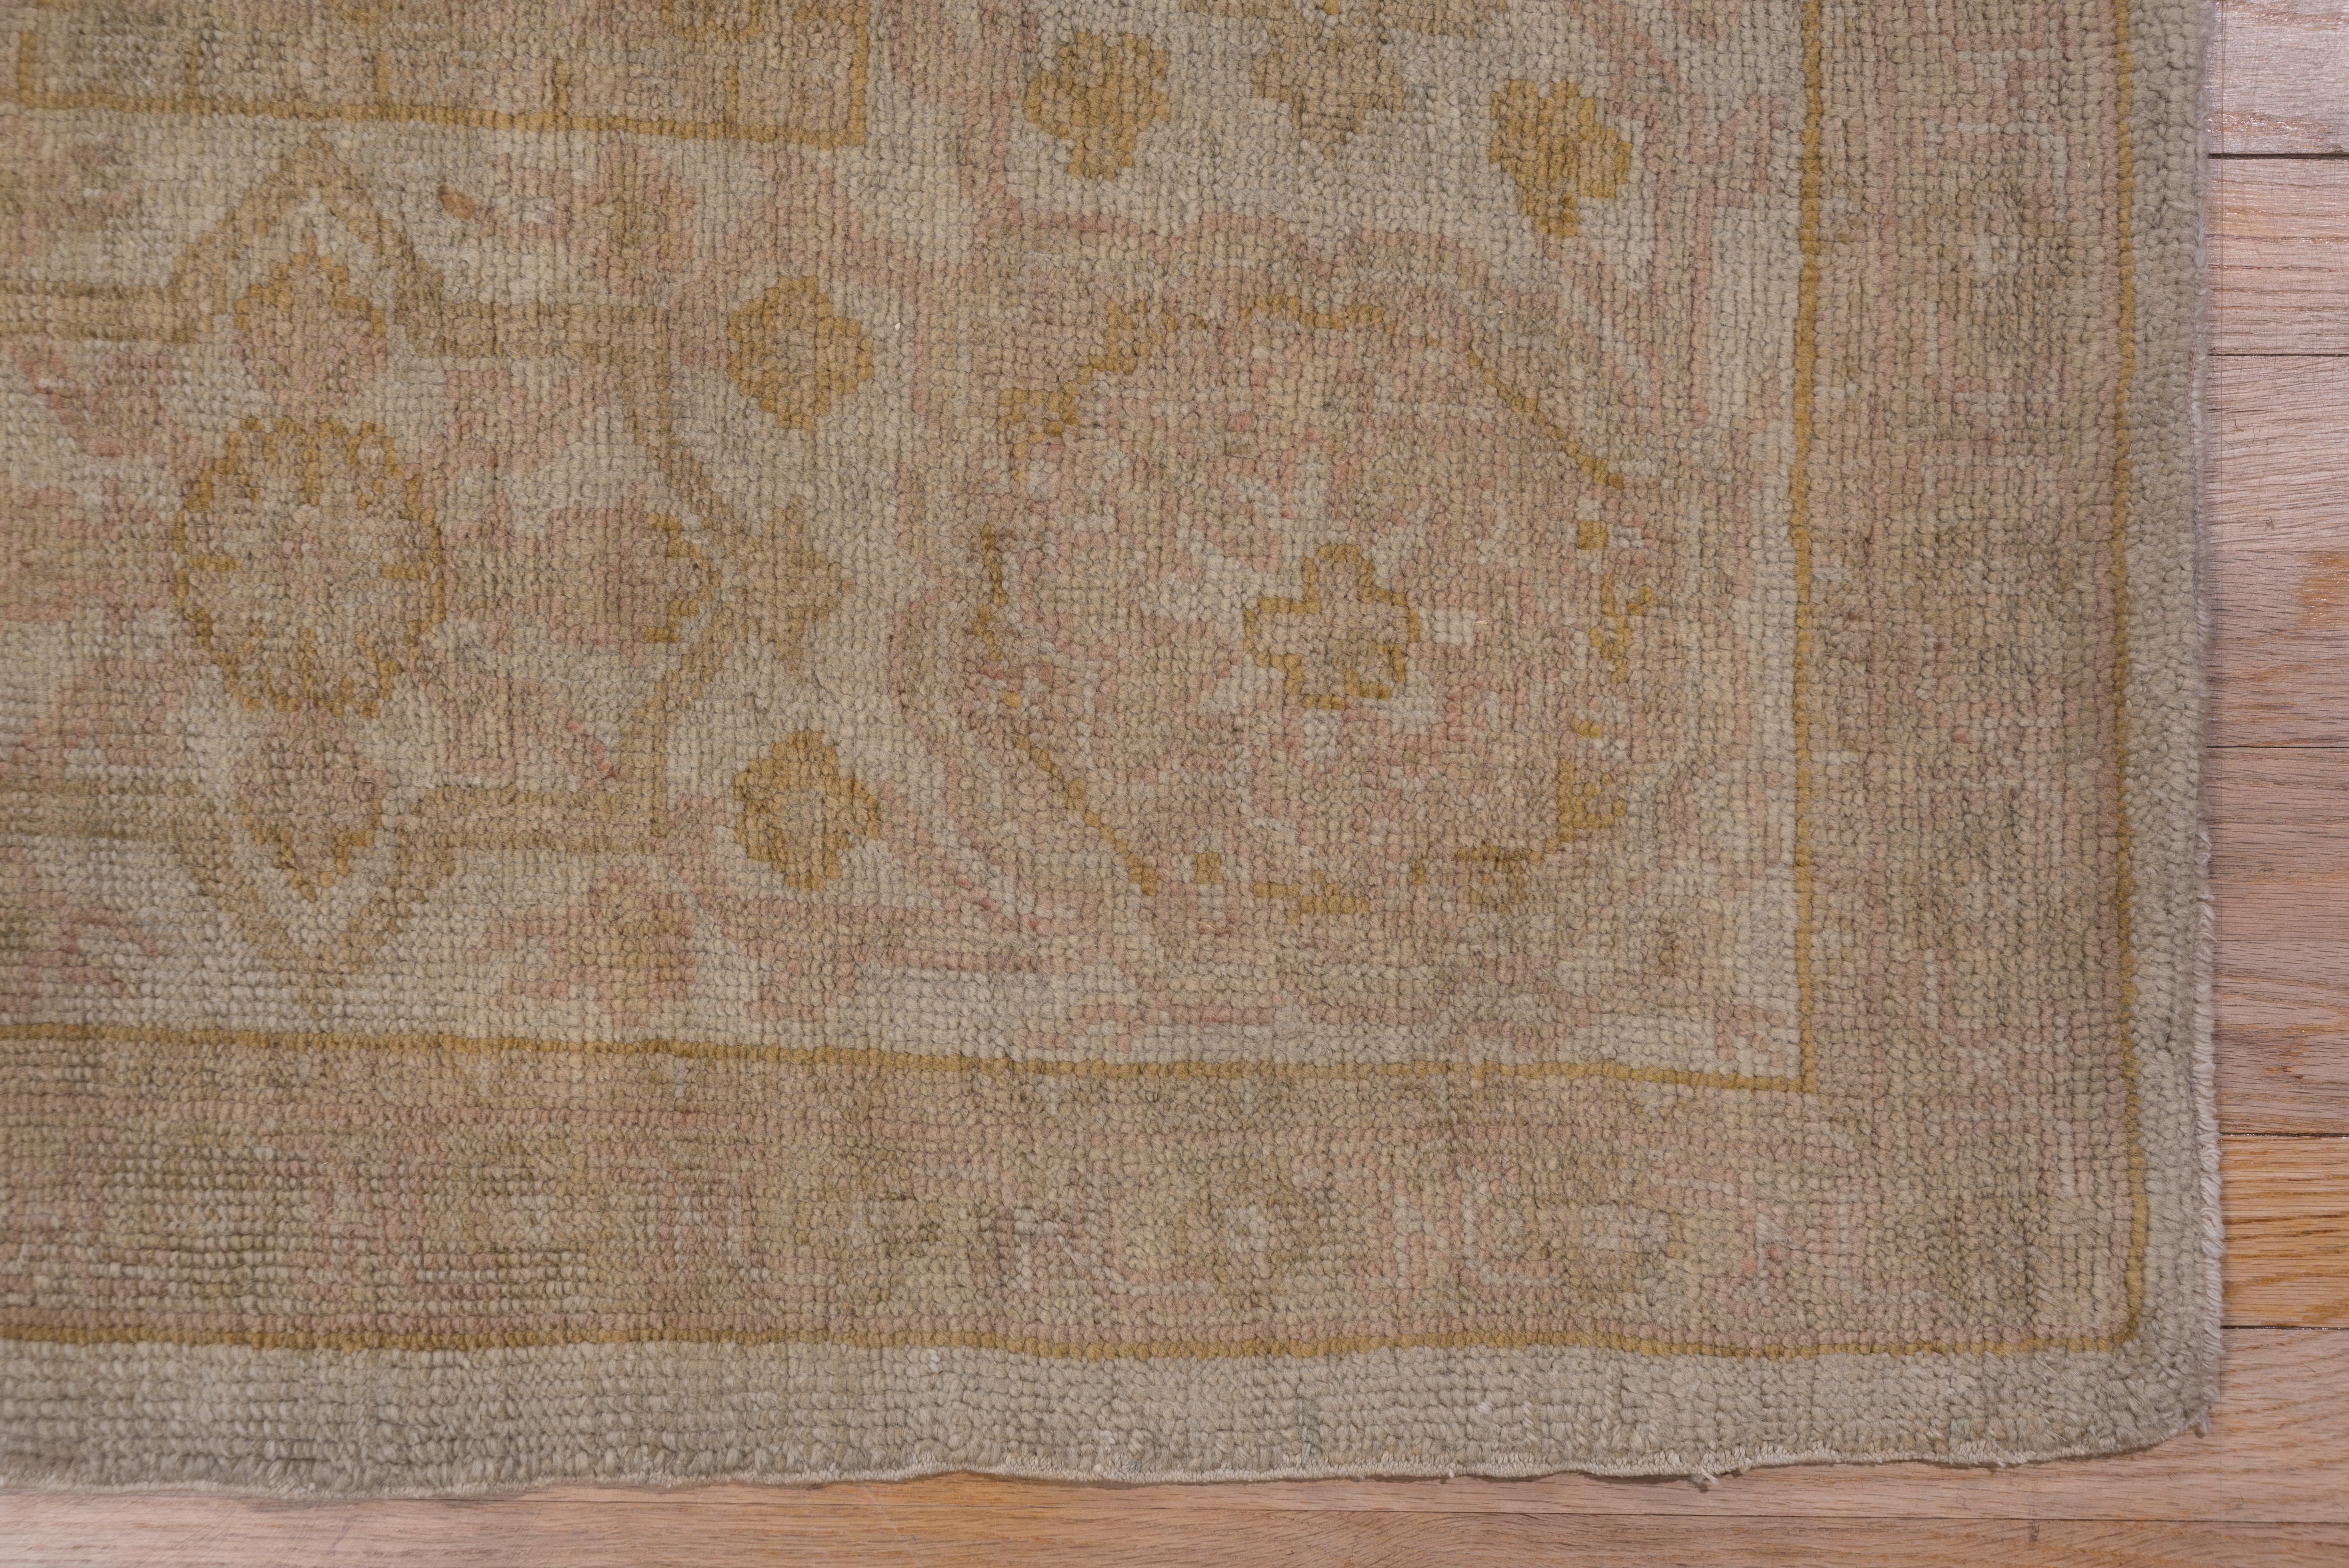 1920s Antique Turkish Oushak Carpet, Ivory Field, Gold & Light Pink Accents For Sale 5